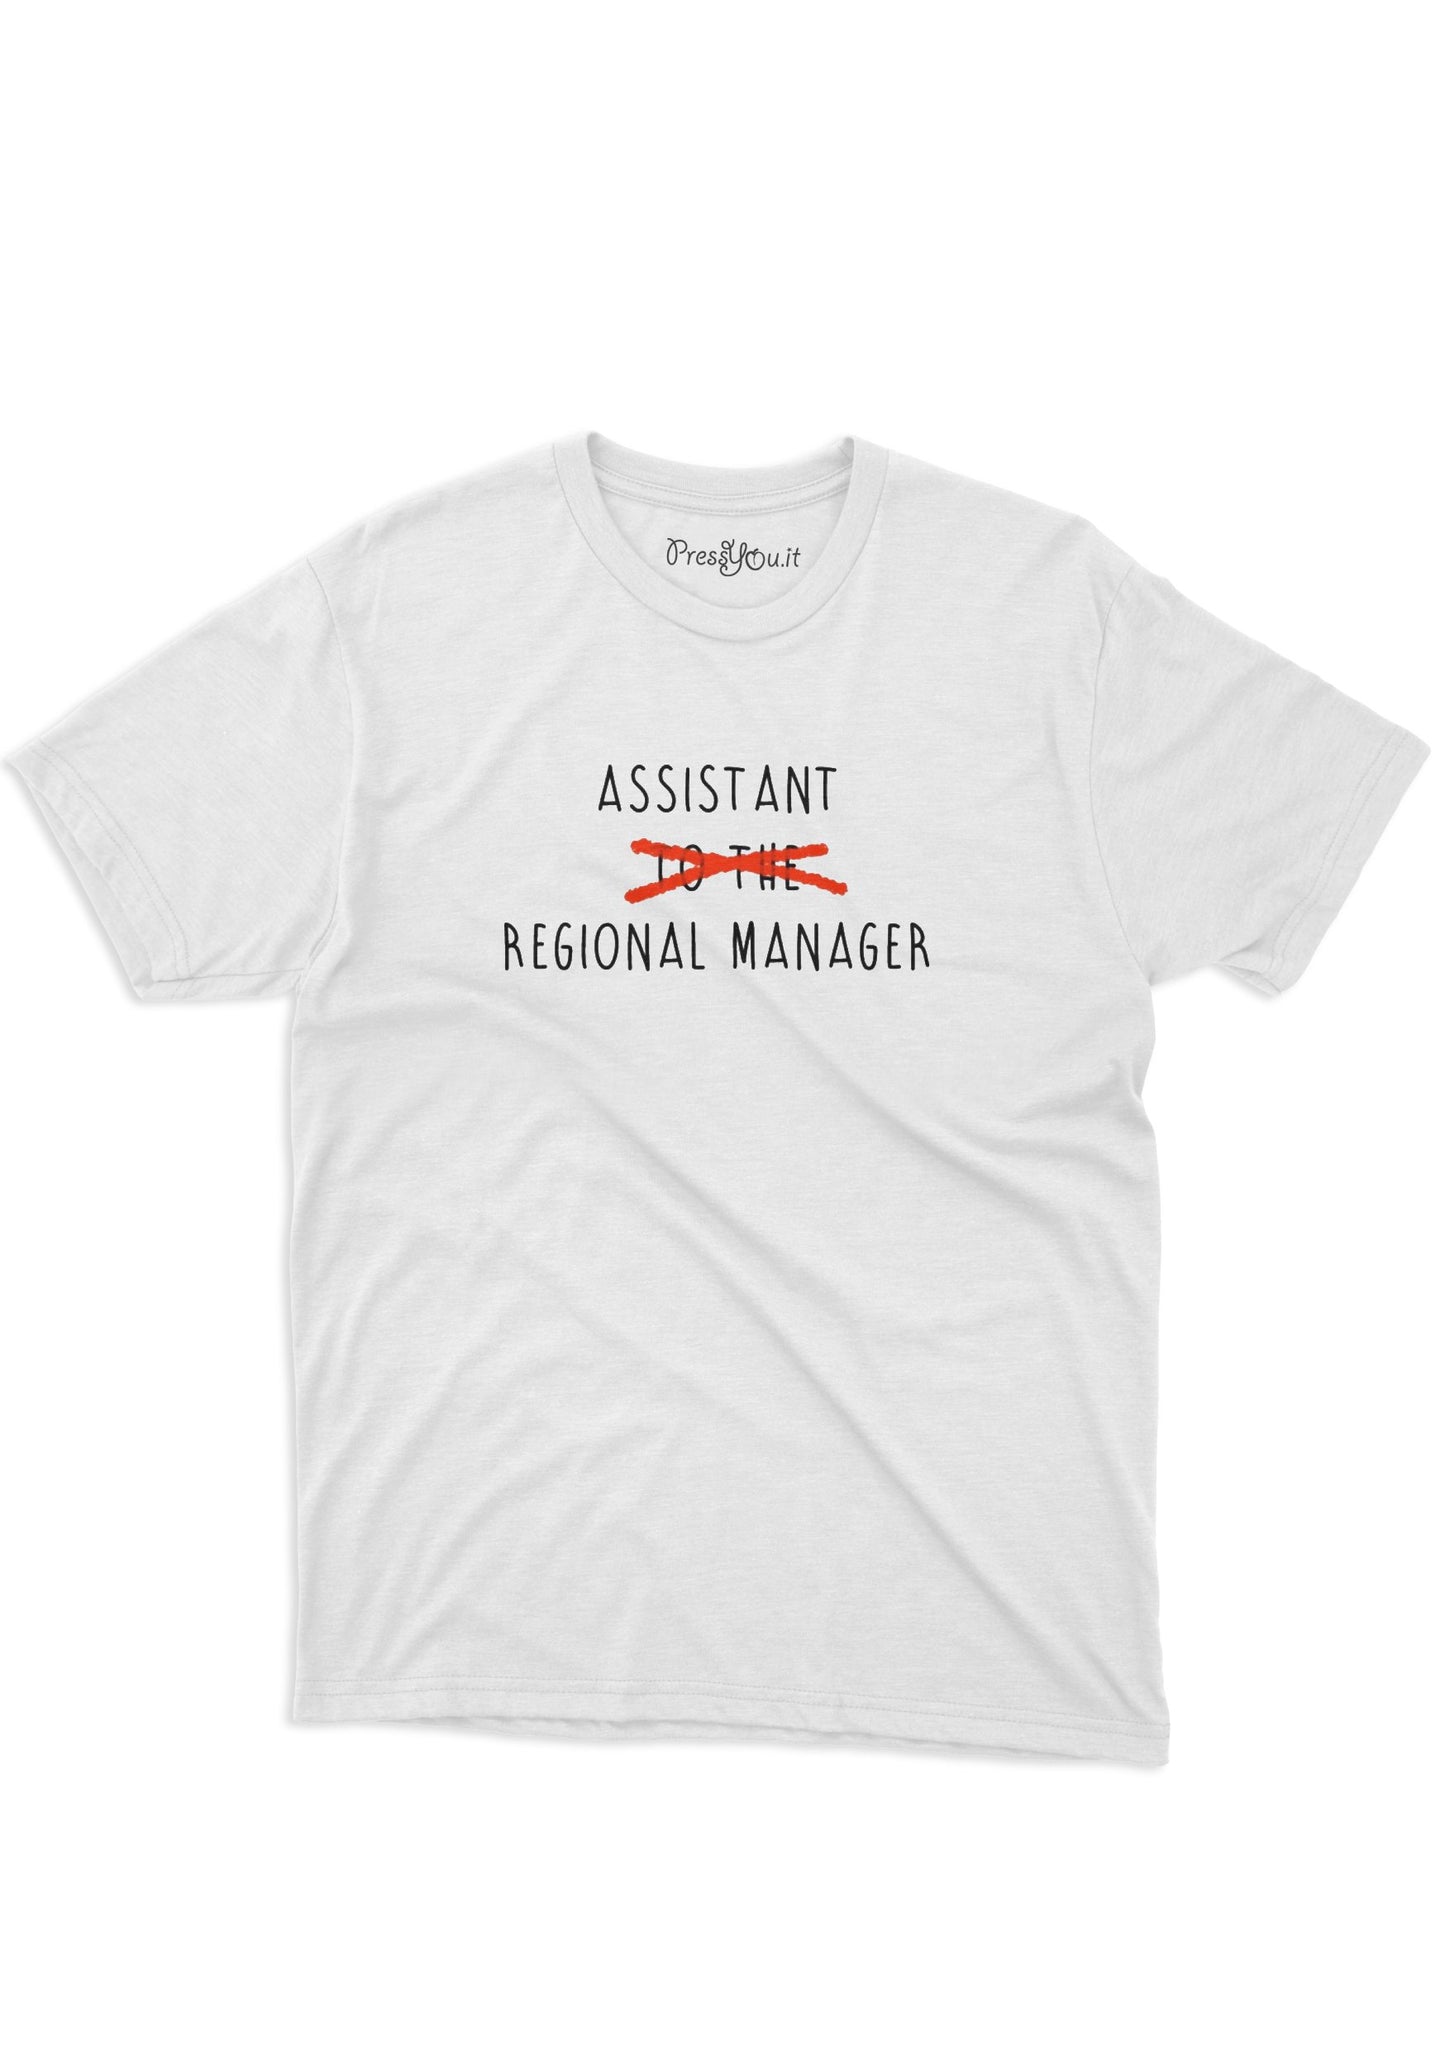 assistant regional manager office Dwight Schrute t-shirt